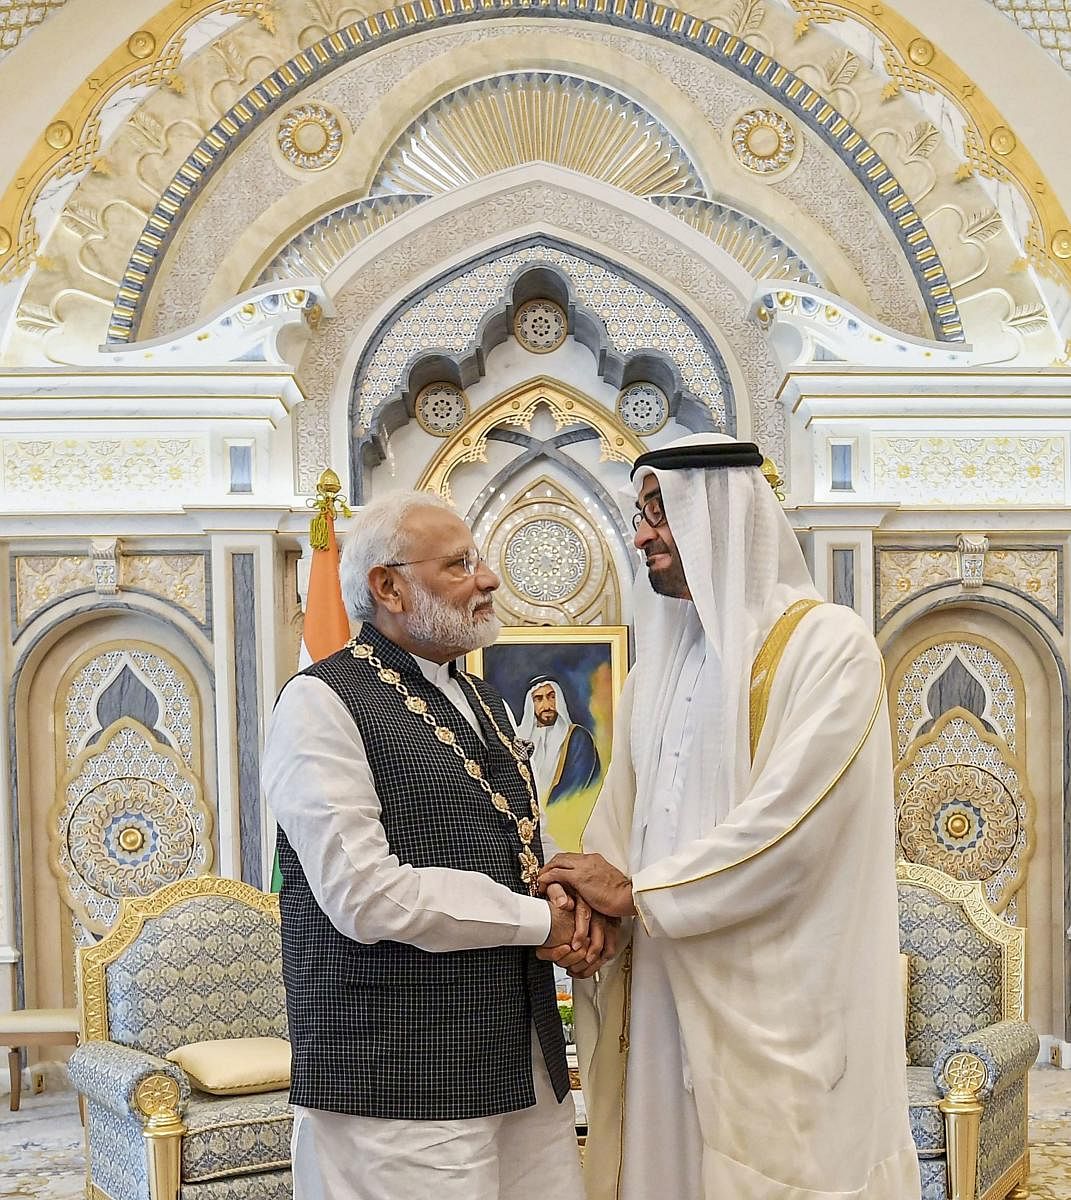 Prime Minister Narendra Modi shakes hands with Crown Prince of the Emirate of Abu Dhabi and Deputy Supreme Commander of the United Arab Emirates Armed Forces Sheikh Mohammed bin Zayed Al Nahyan after being conferred ' Order of Zayed'-- UAE's highest civil decoration, in Abu Dhabi, Saturday, Aug 24, 2019. (PTI Photo)